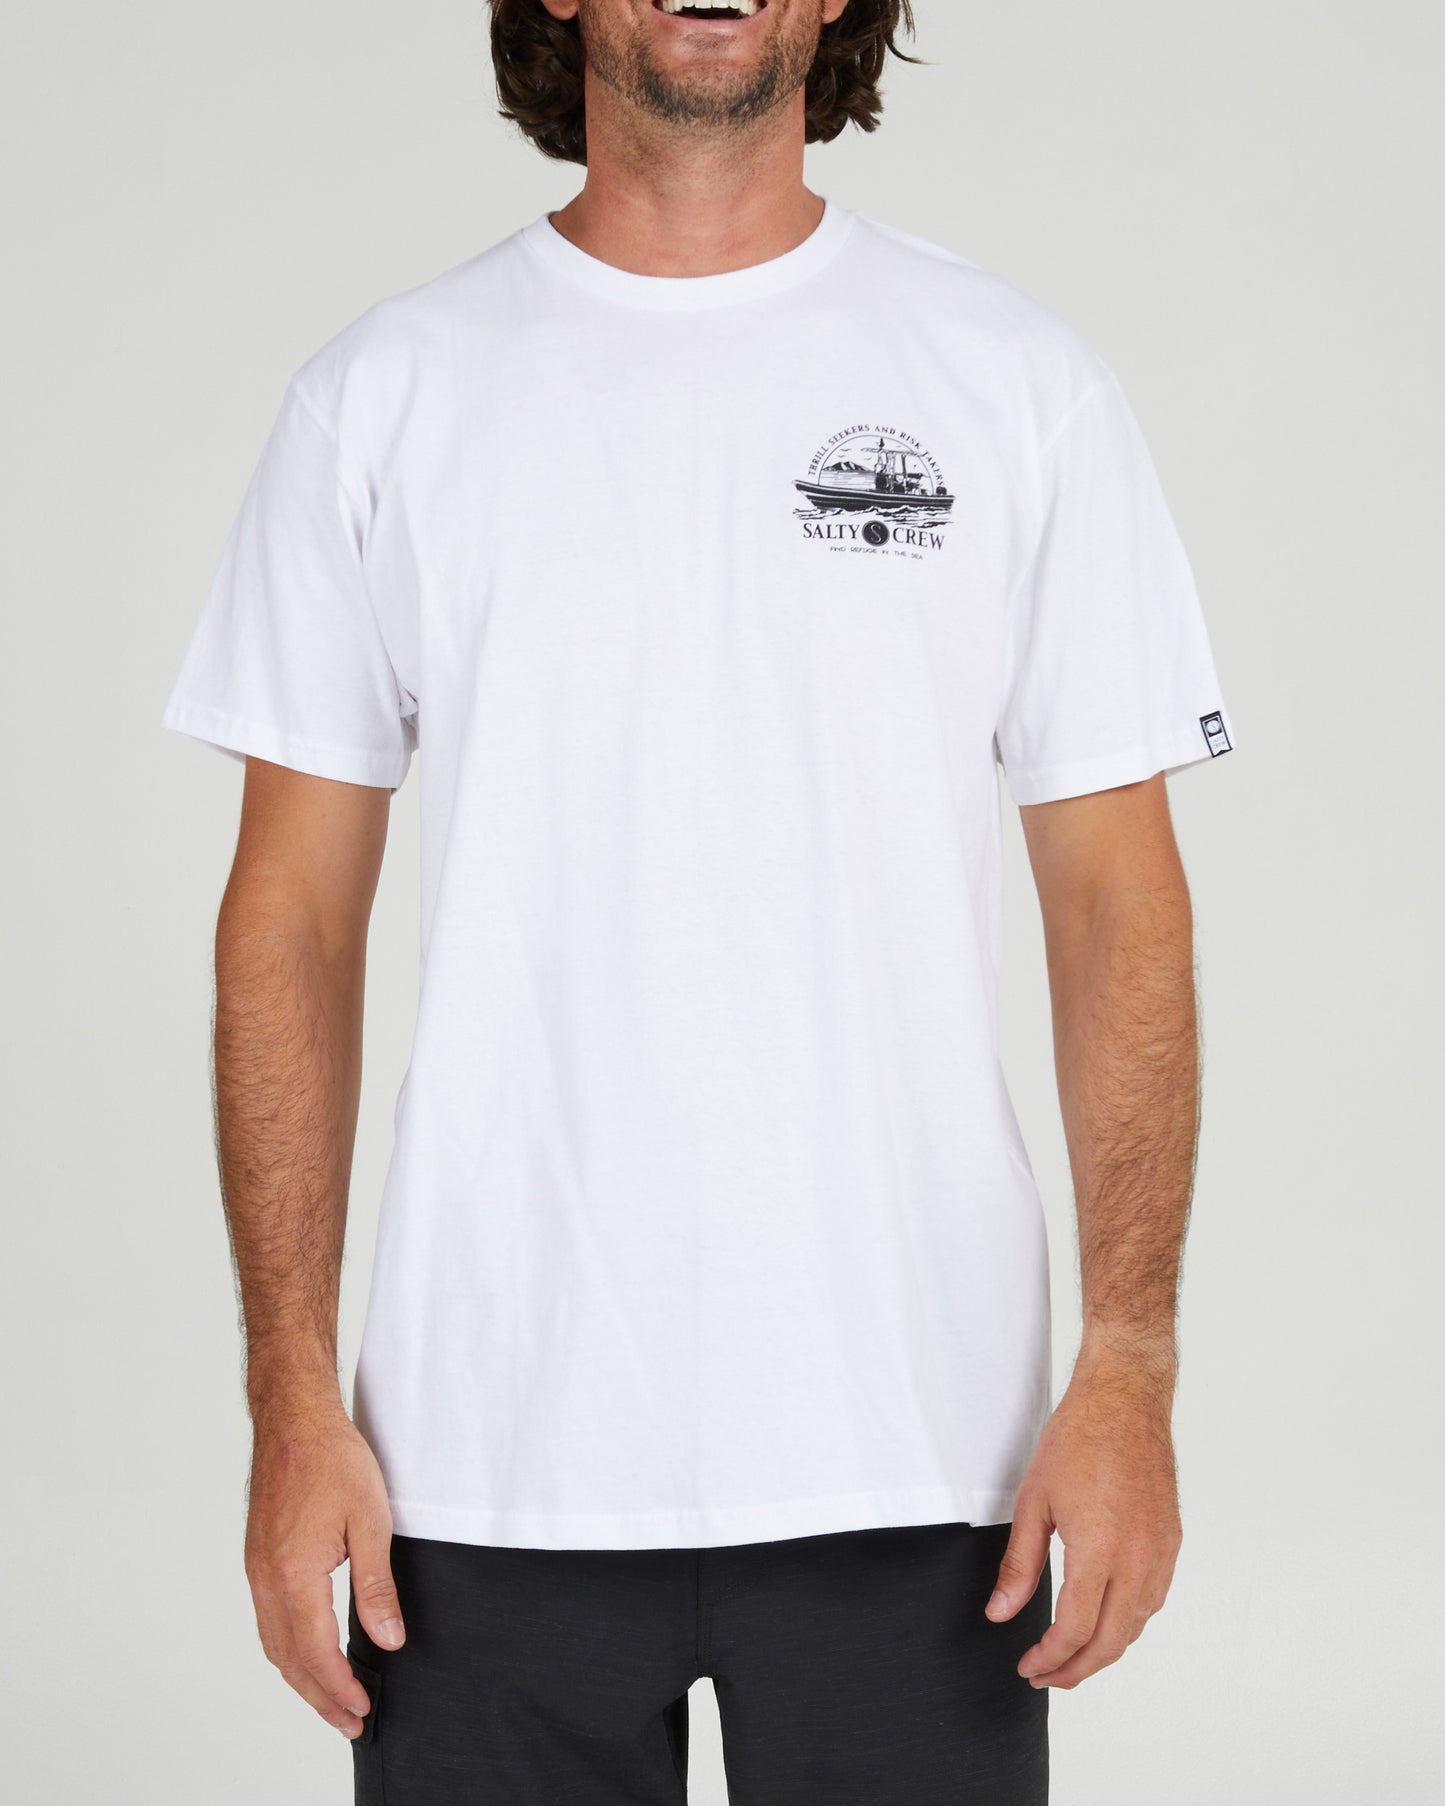 On body front of the Super Panga White S/S Standard Tee